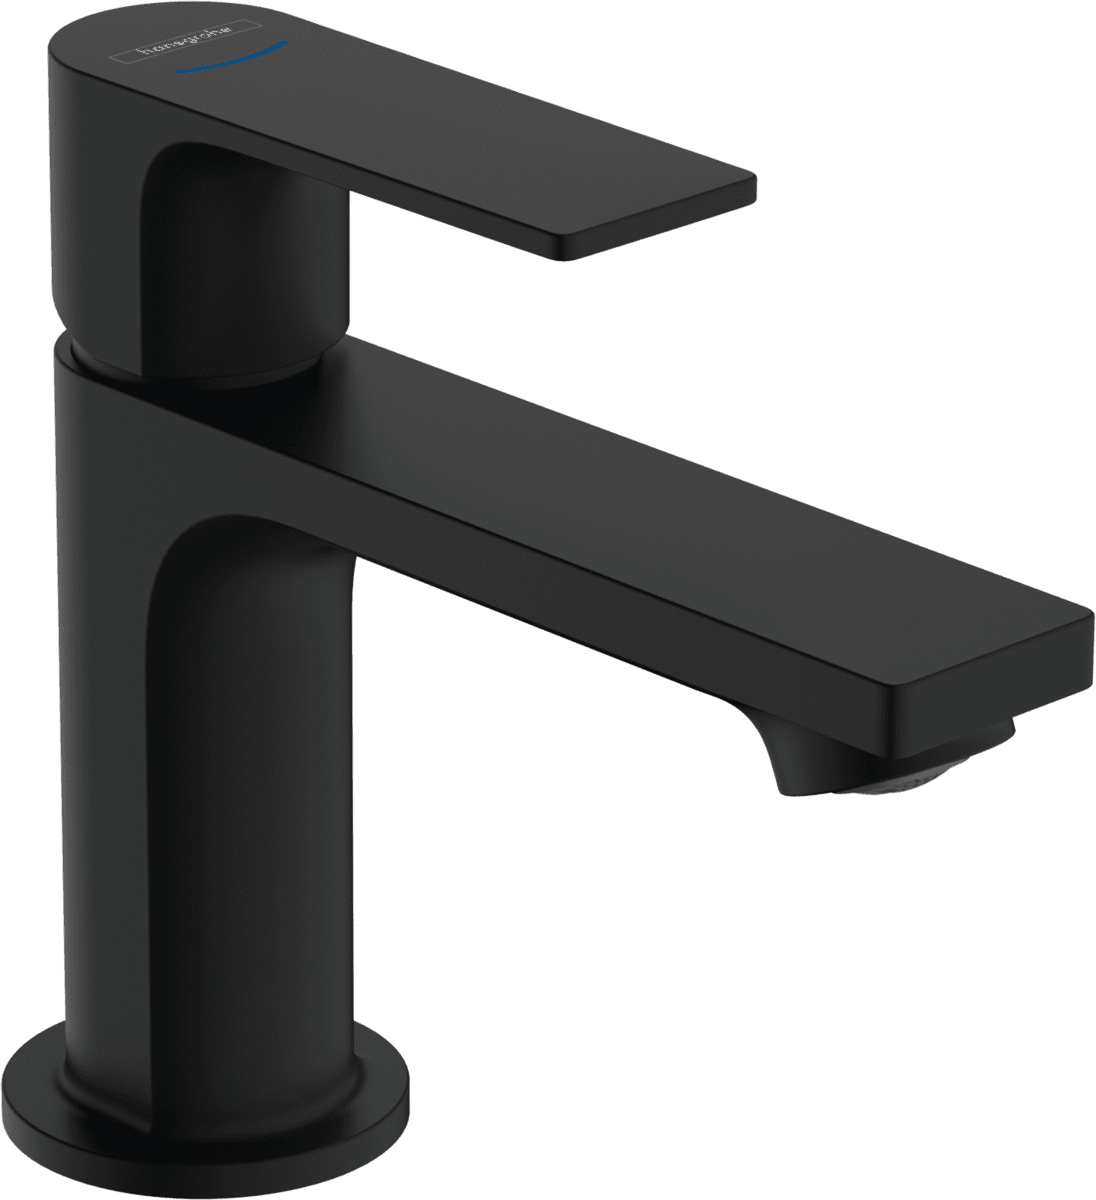 Picture of HANSGROHE Rebris E Pillar tap 80 with lever handle for cold water or pre-adjusted water without waste set #72506670 - Matt Black